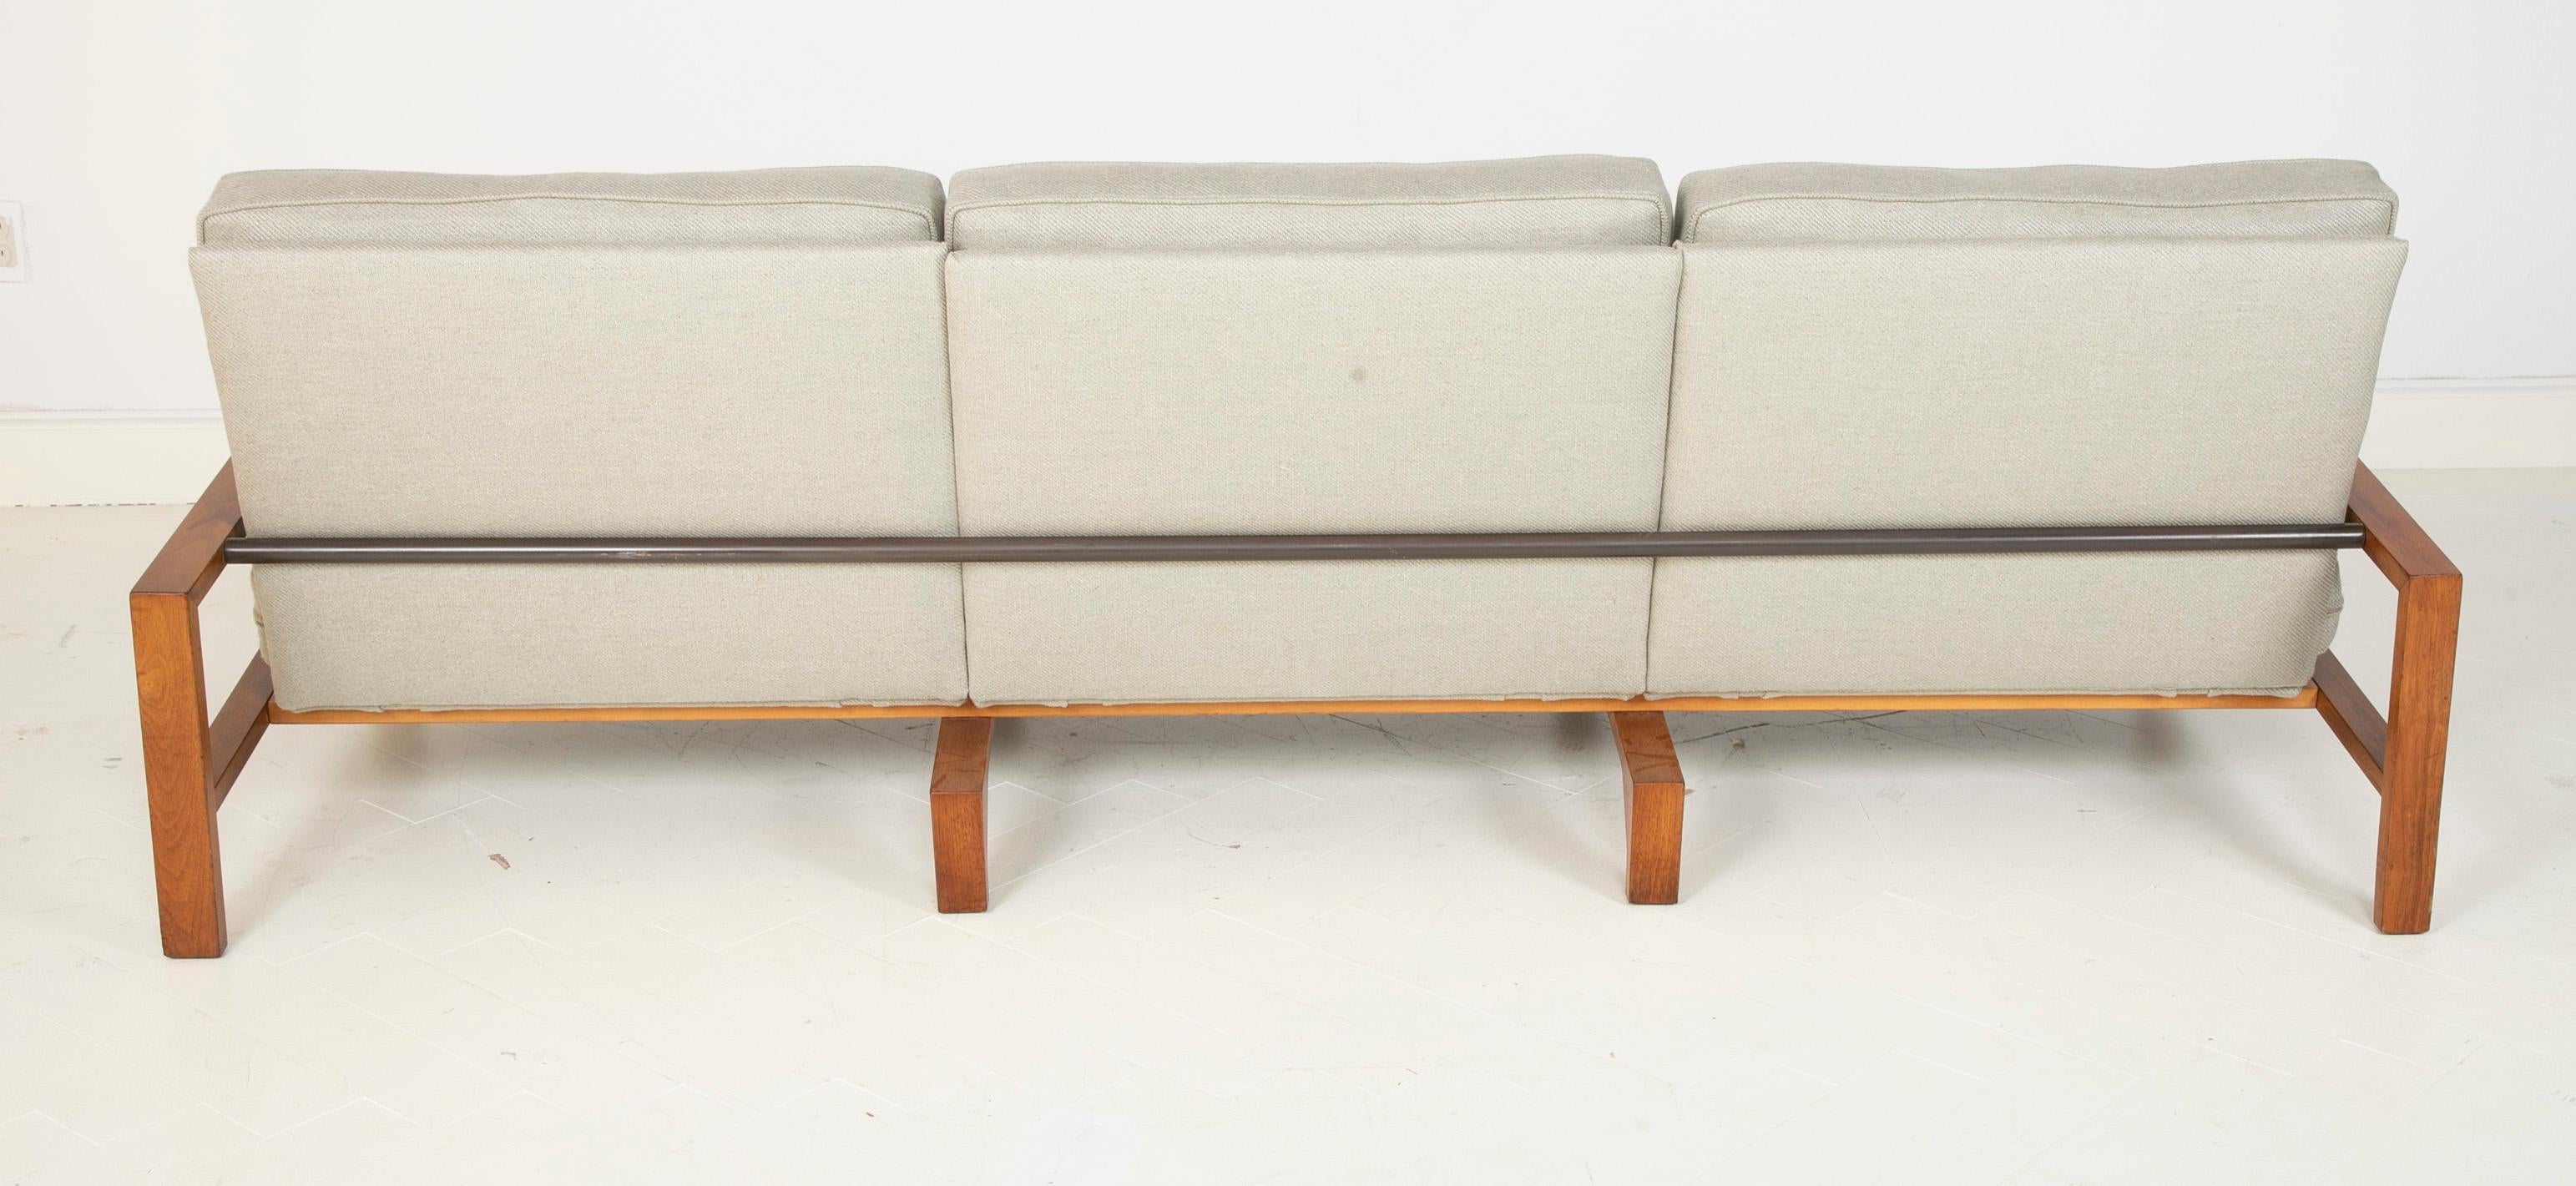 Van Keppel & Green Prototype Sofa Owned by The Founders of Architectural Pottery 2